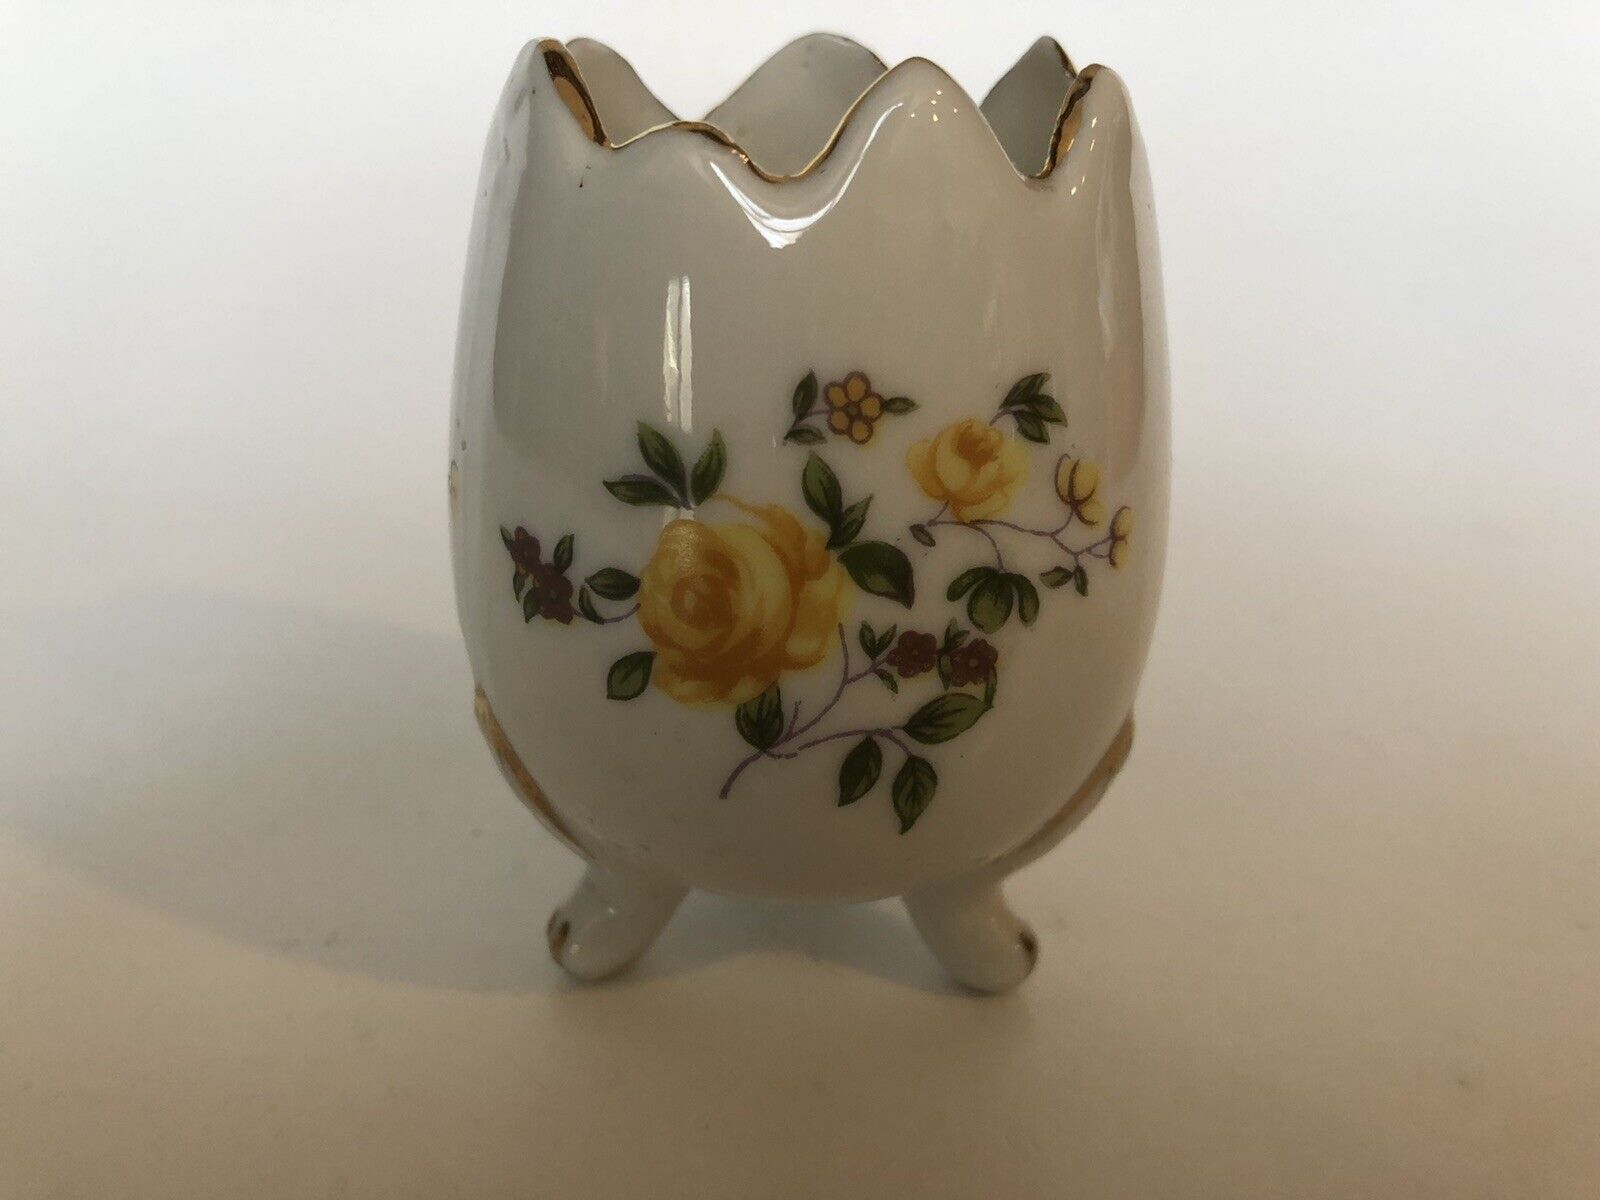 Porcelain Cracked Egg Footed Vase. Yellow Roses Gold Trim. Excellent Condition